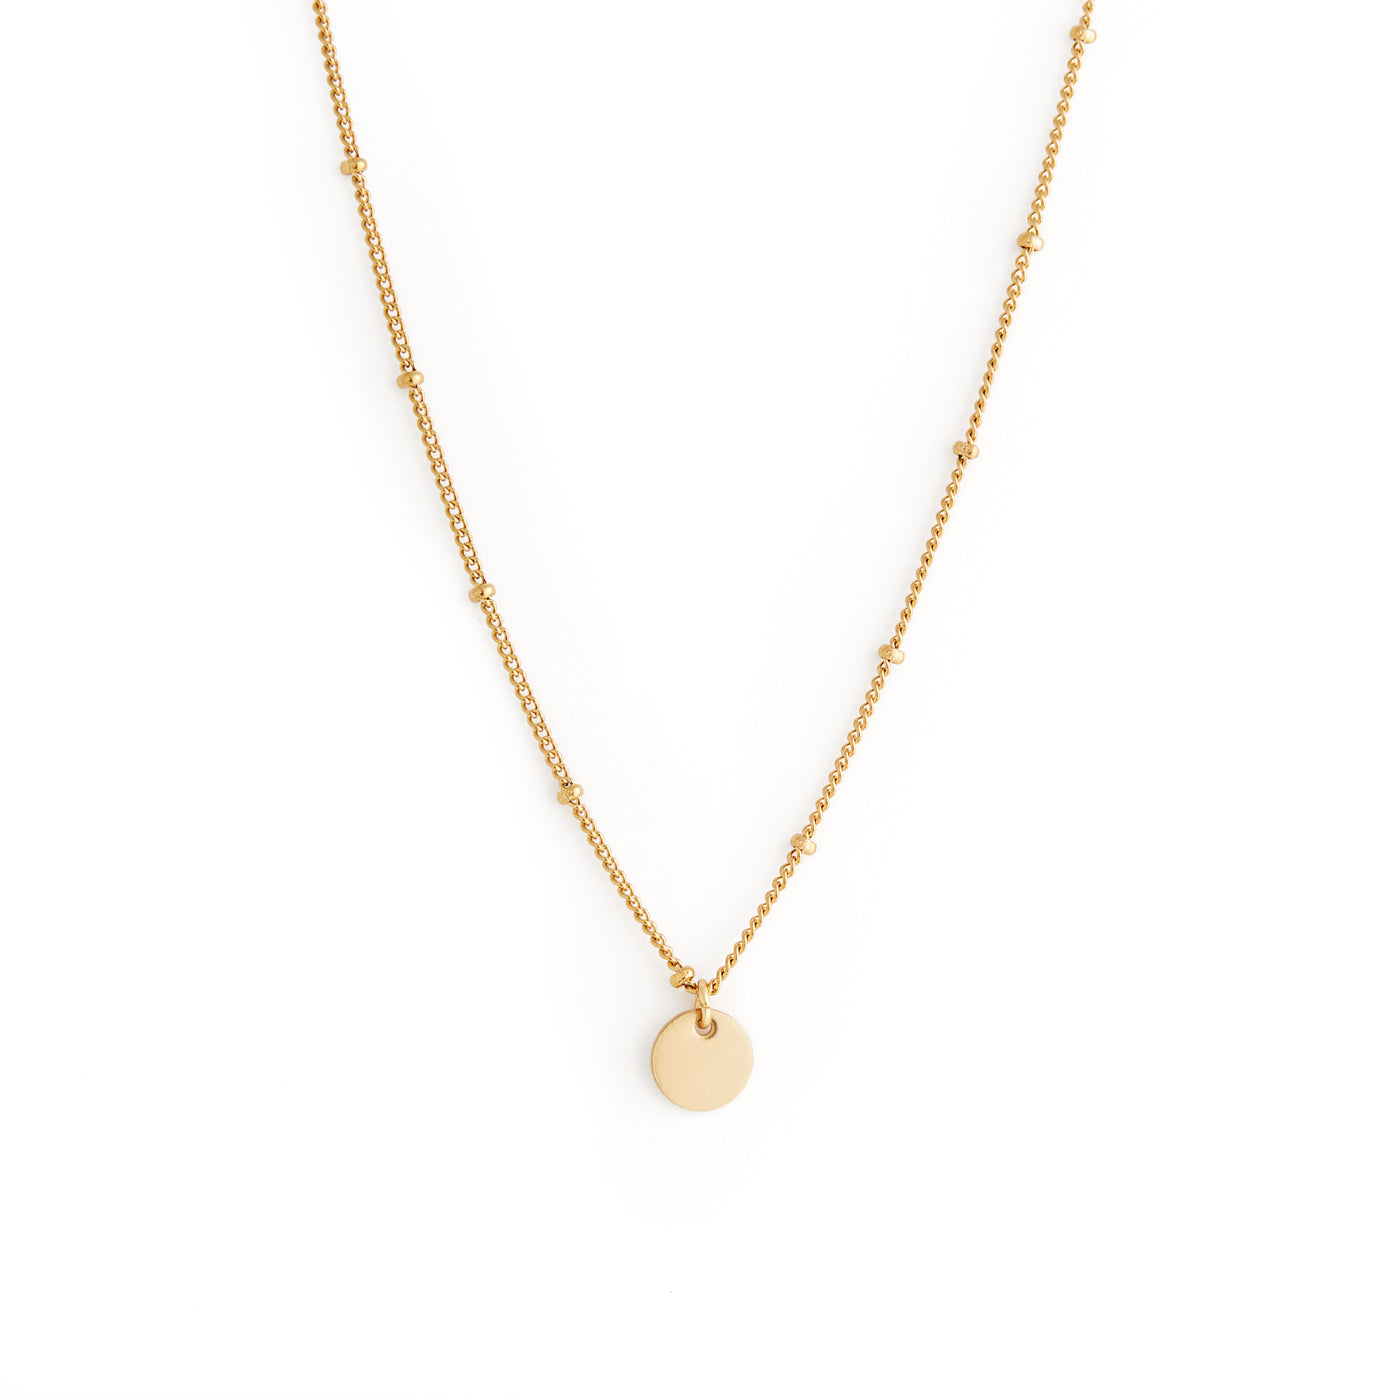 Delicate Necklace - Gold